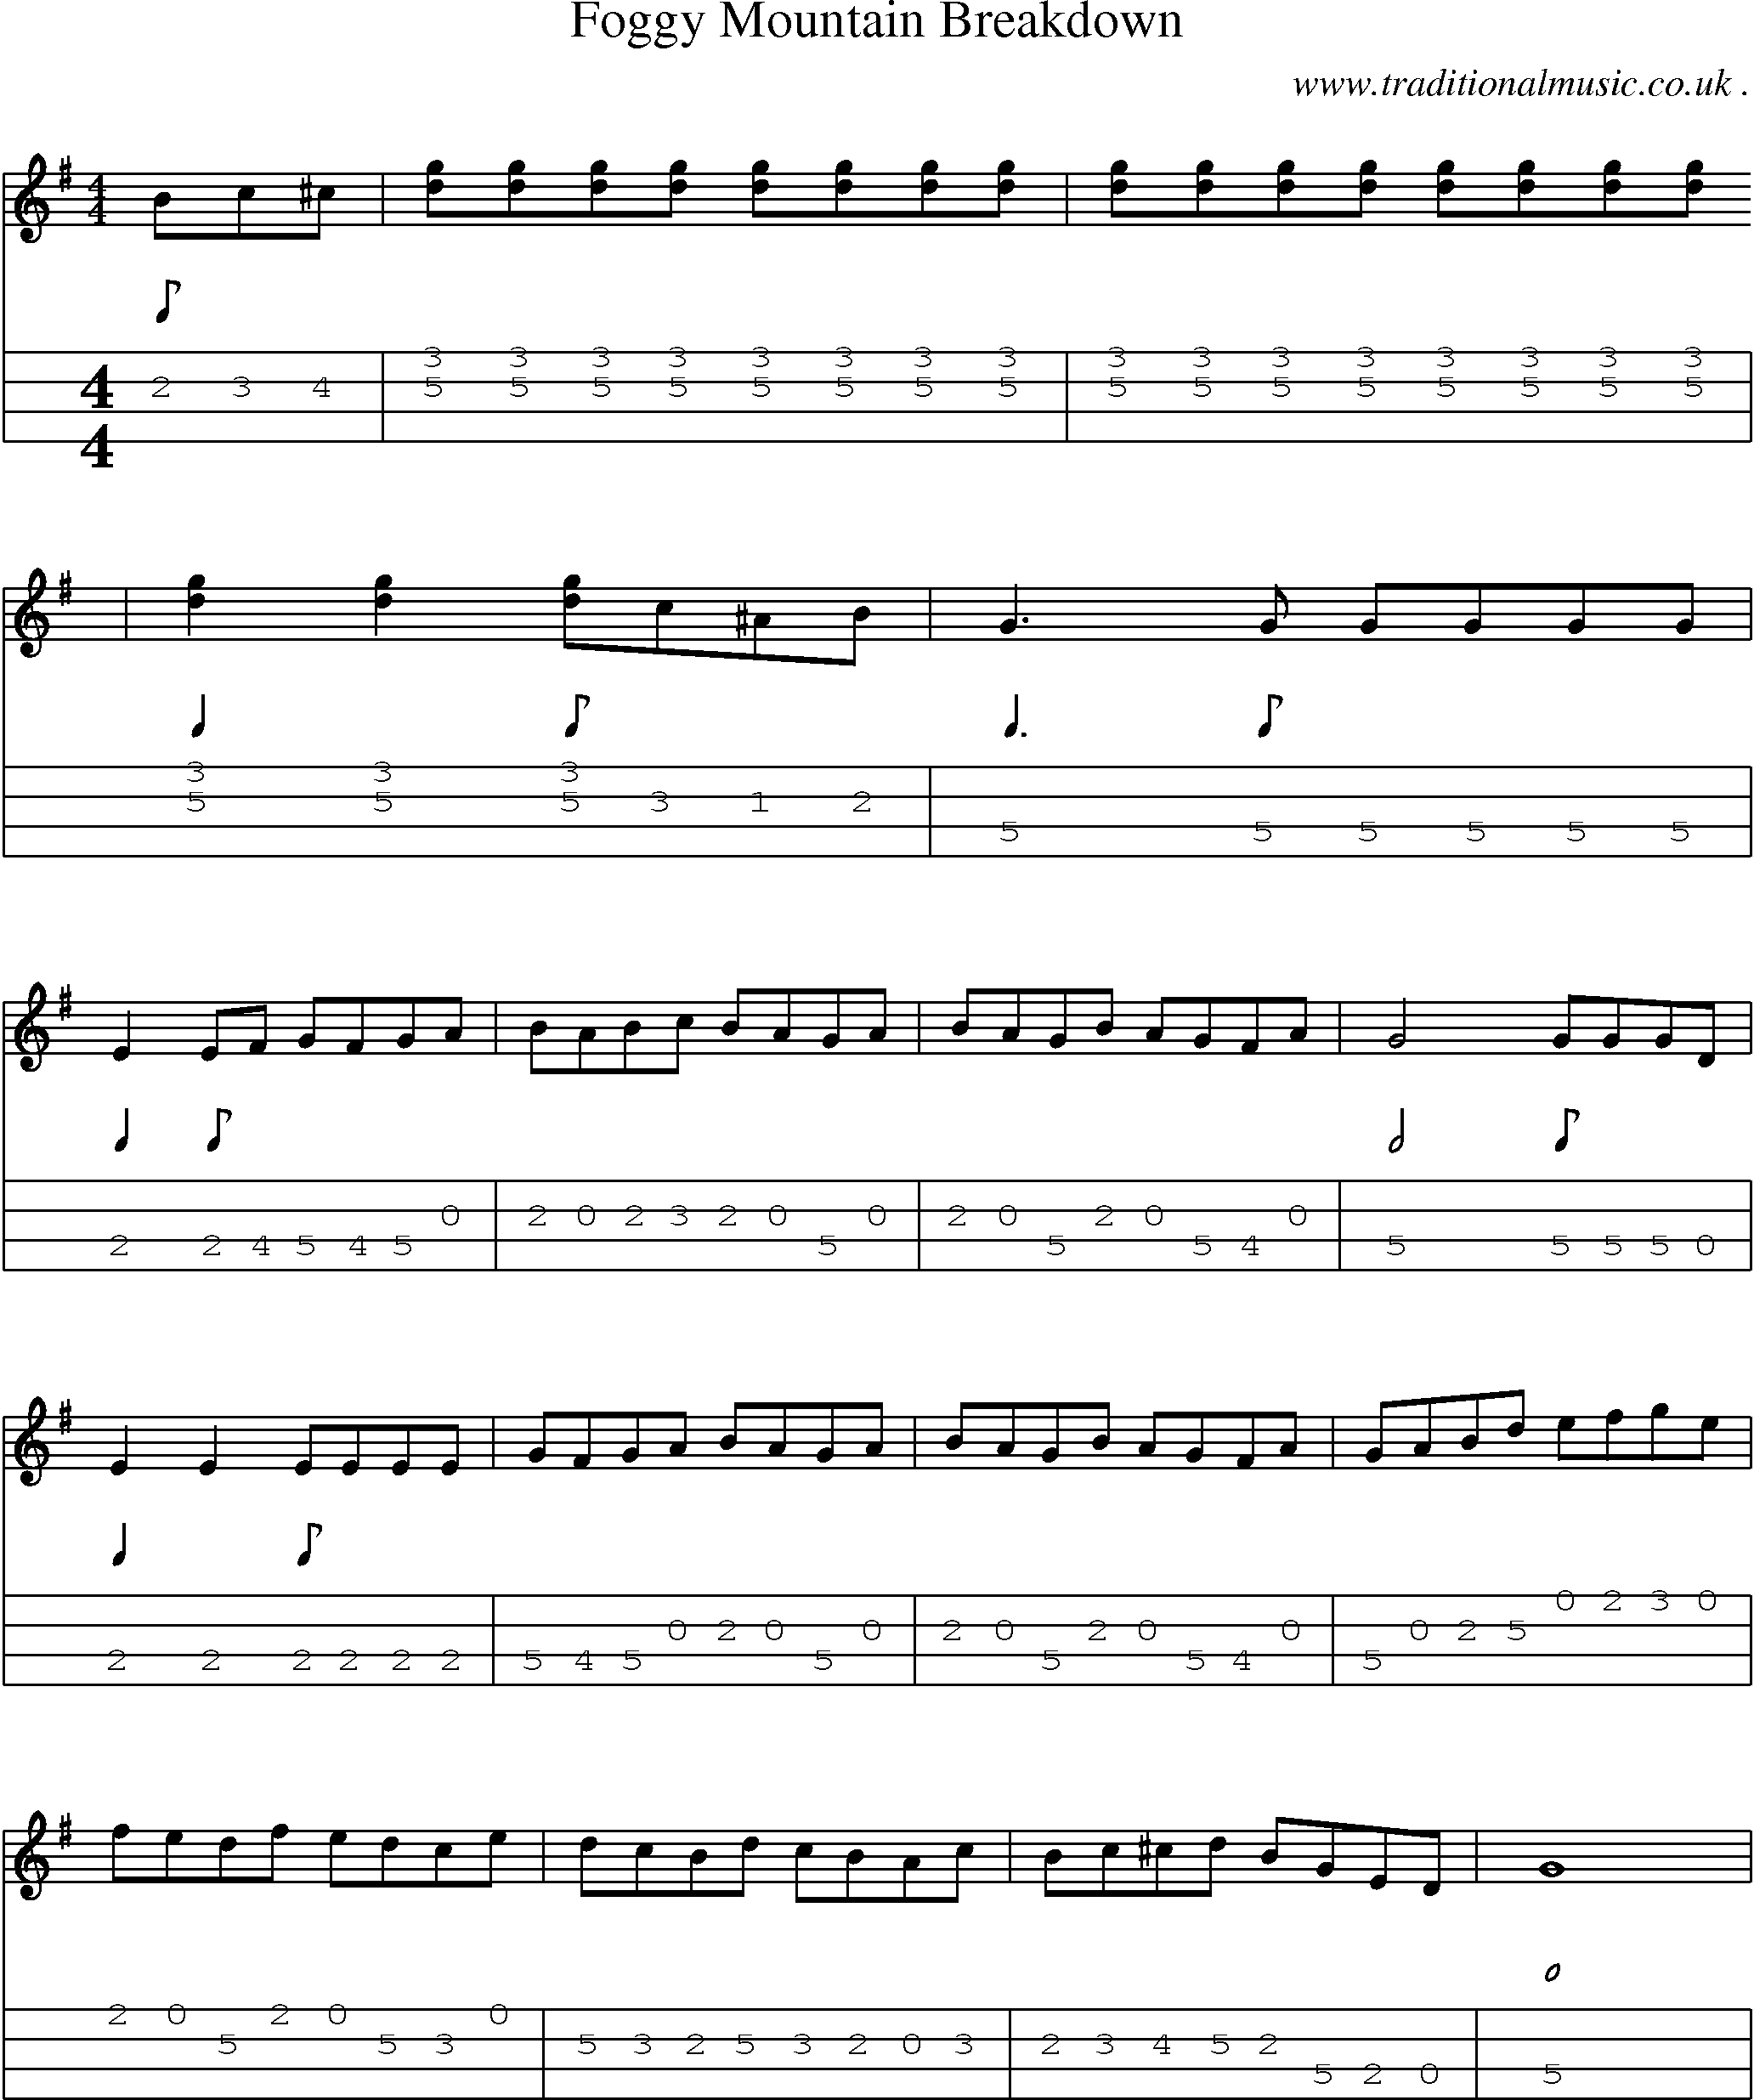 American Old Time Music Scores And Tabs For Mandolin Foggy